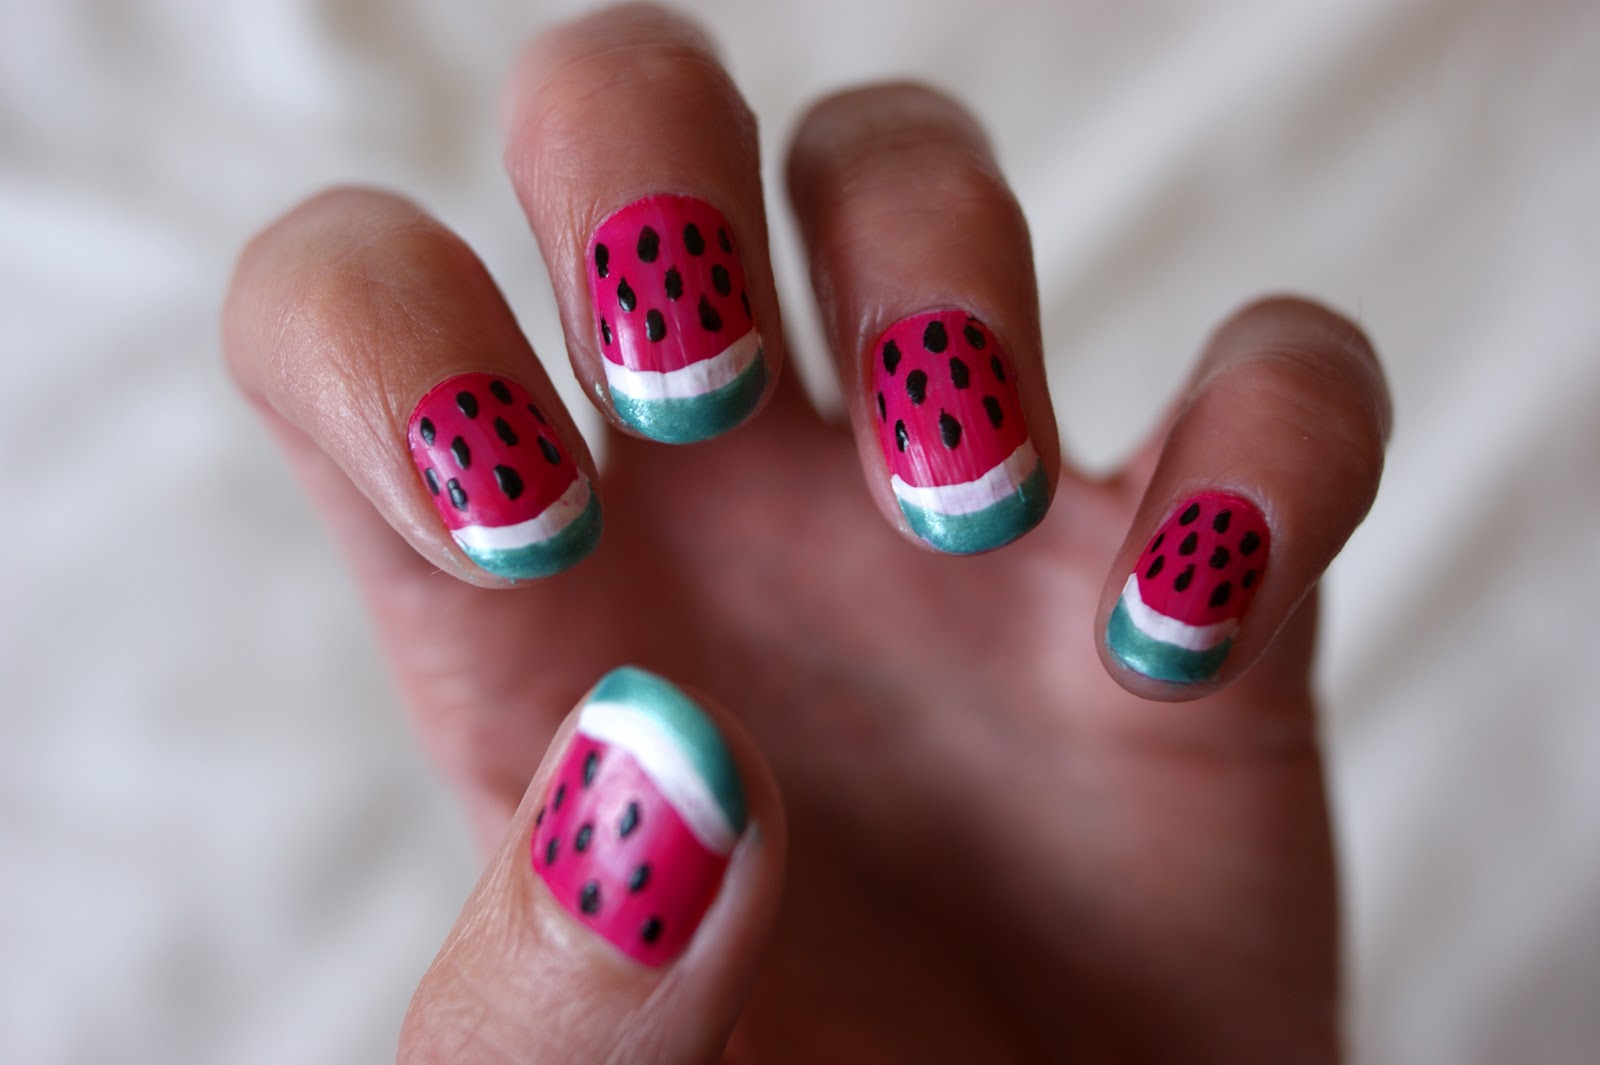 9. Watermelon Nail Art for the Summer - wide 6